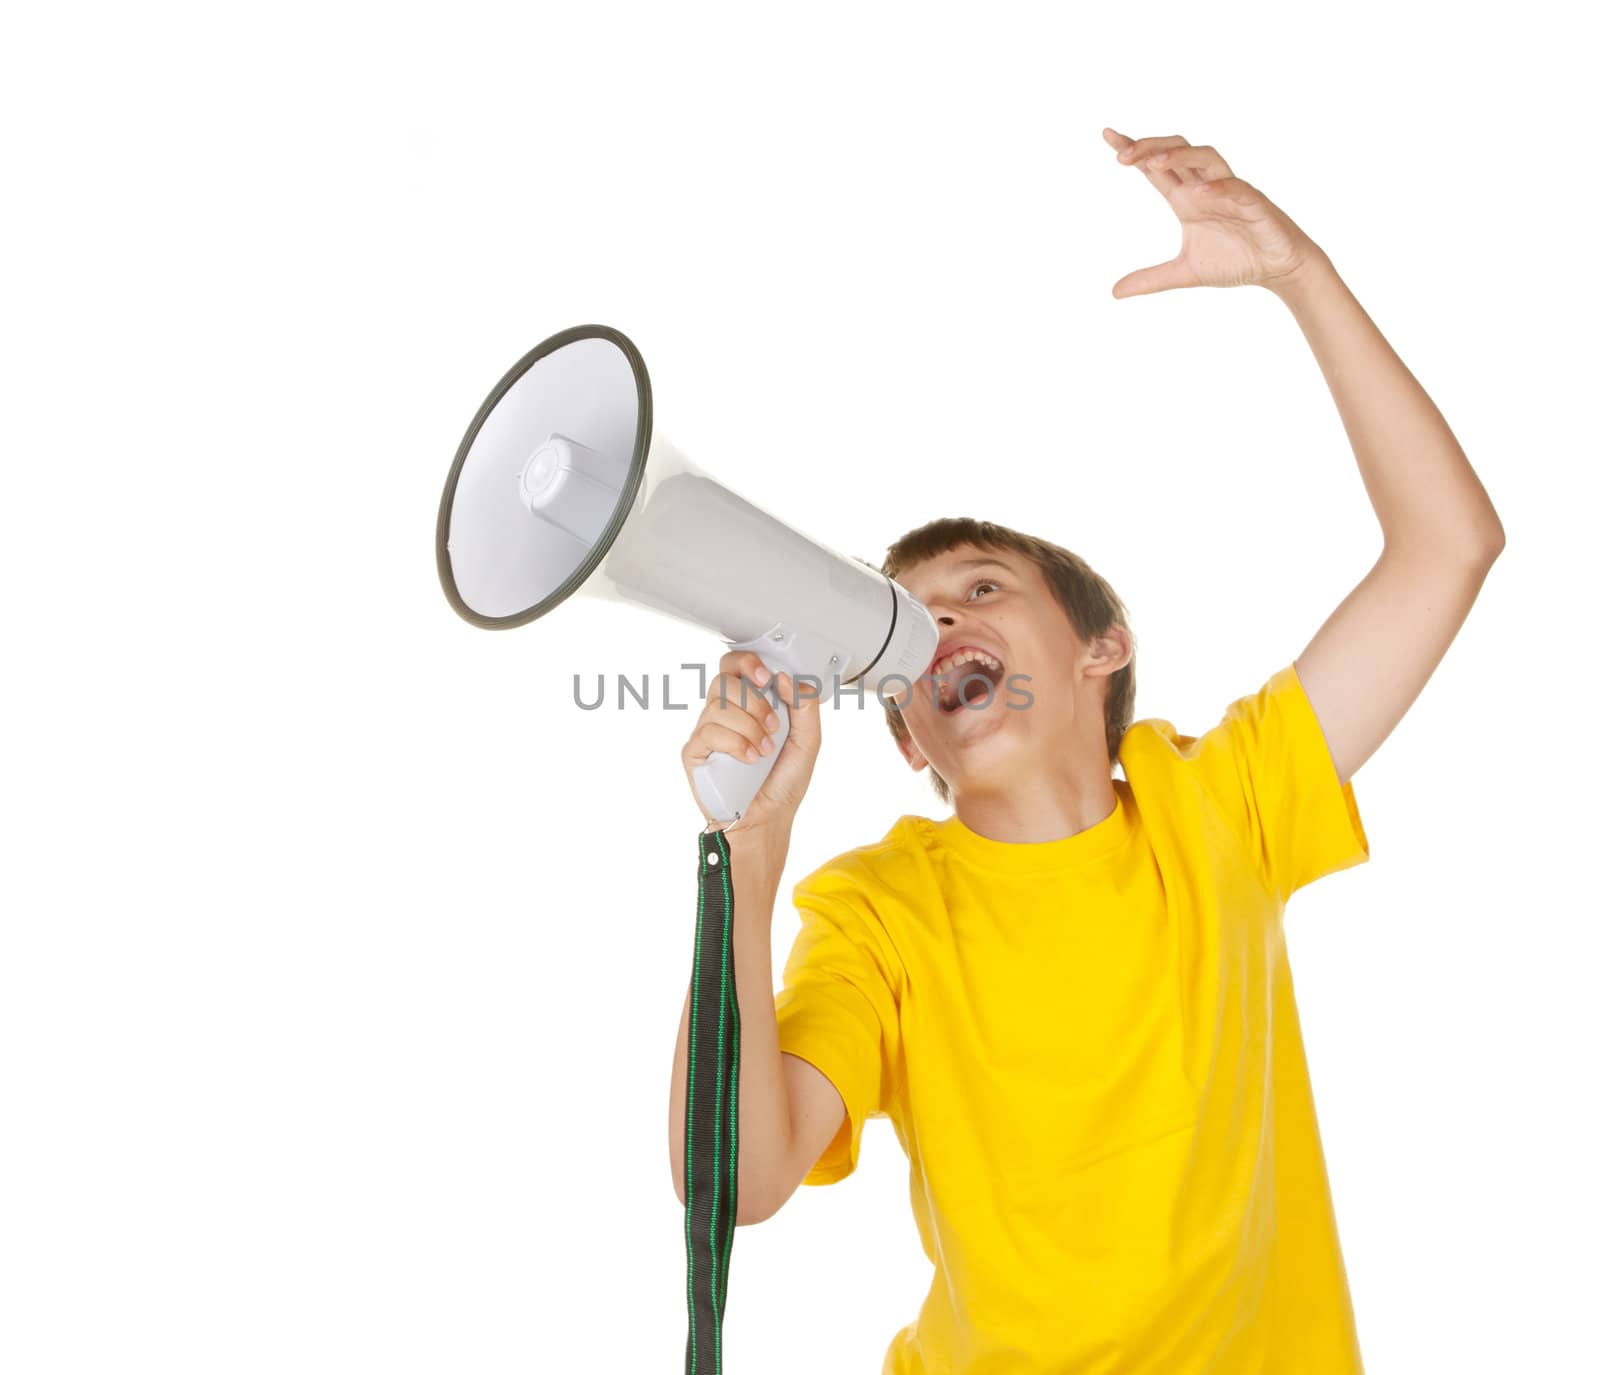 boy yelling into a megaphone by clearviewstock